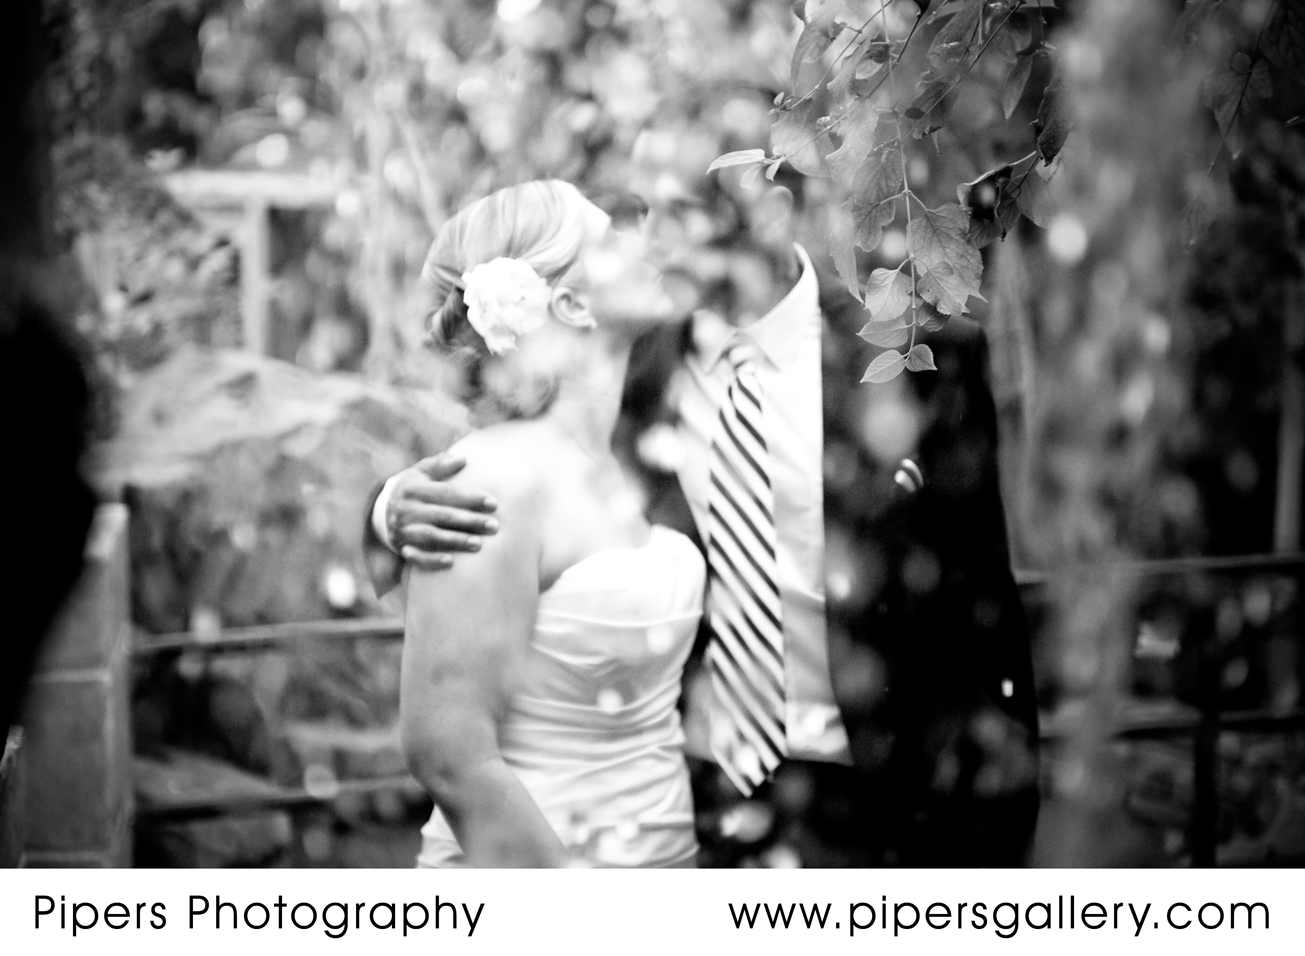 Dan and lisa - May 2, 2010 Franklin Park Conservatory Wedding